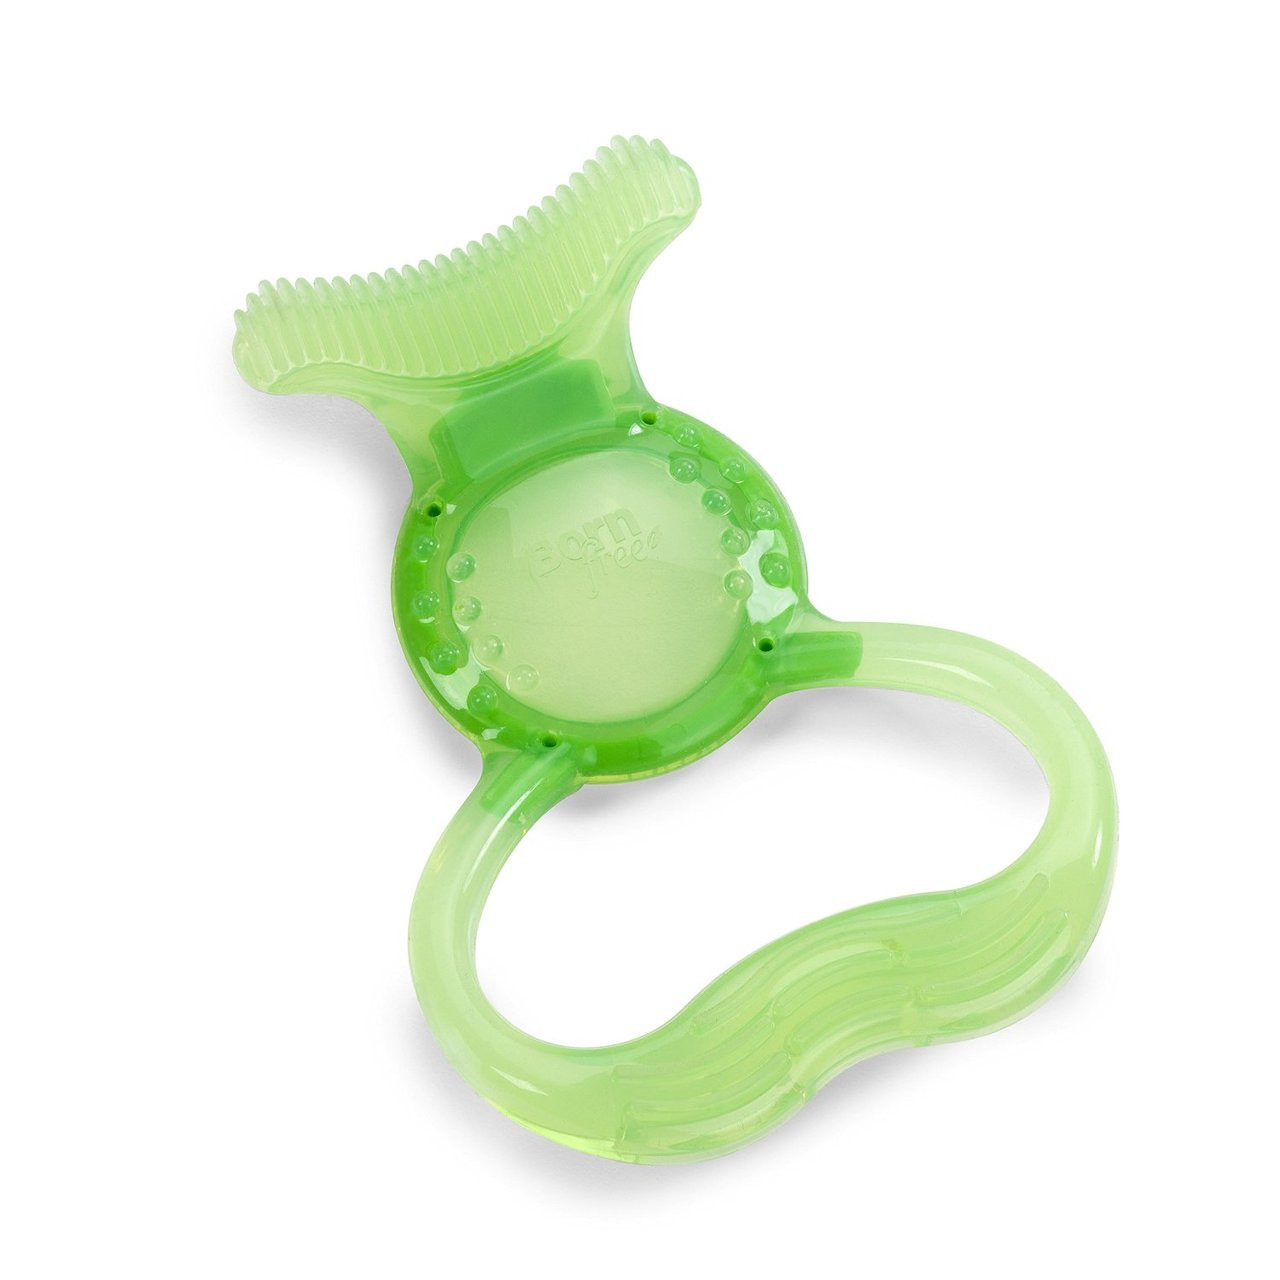 Born Free Silicone Massaging Gum Brush and Teether for Infants and Babies 